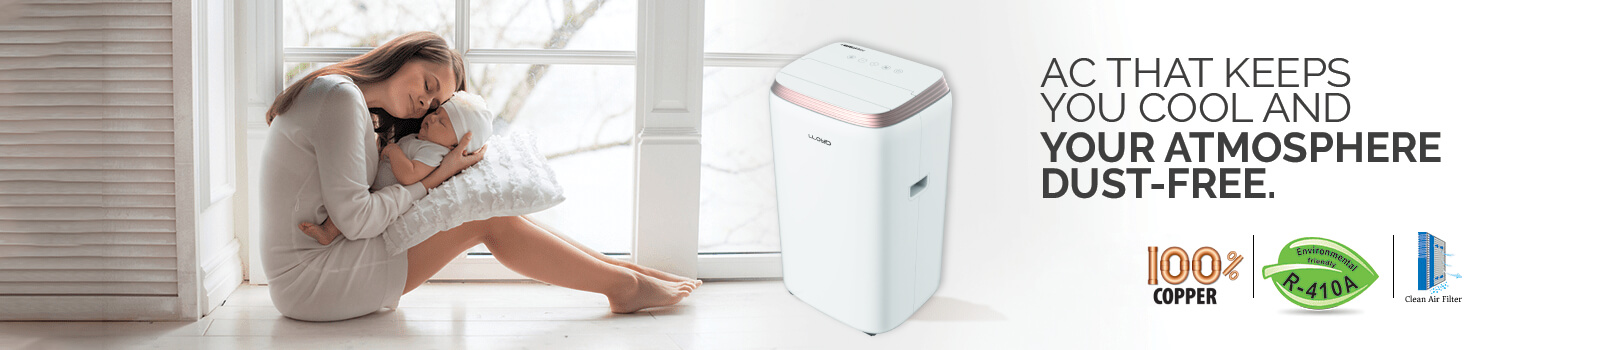 Portable Air Conditioners Final